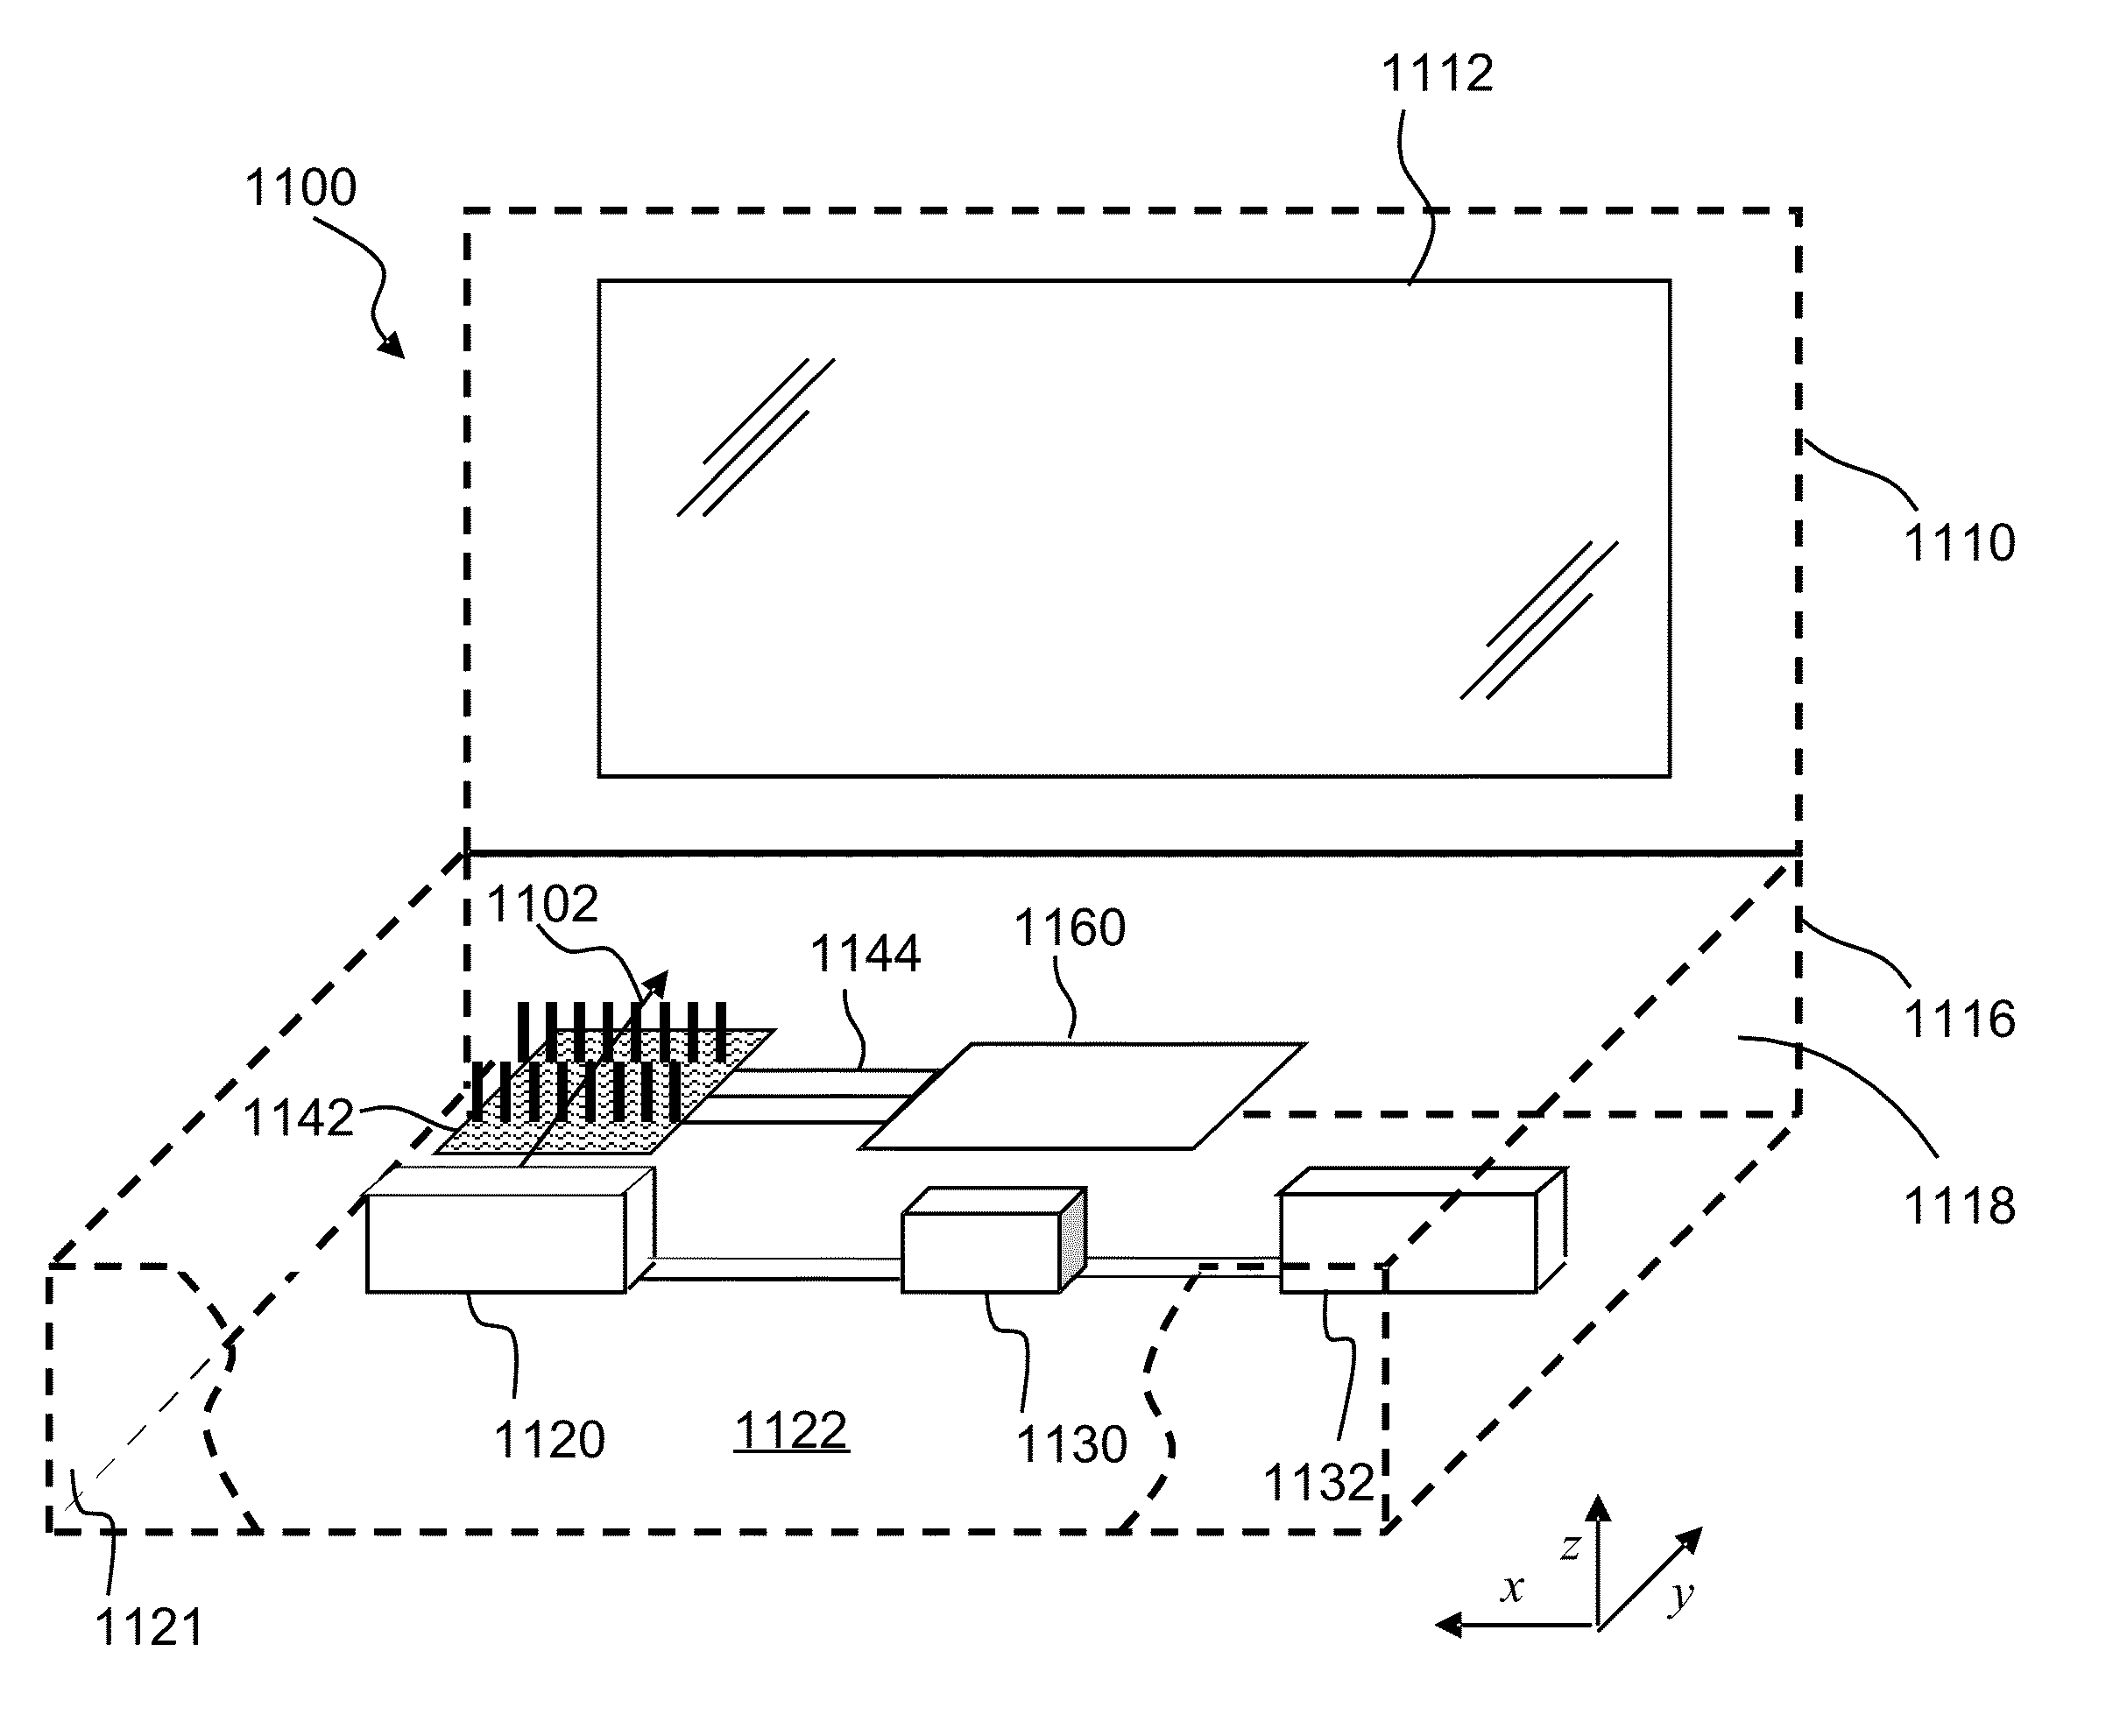 System and method for in-situ conditioning of emitter electrode with silver